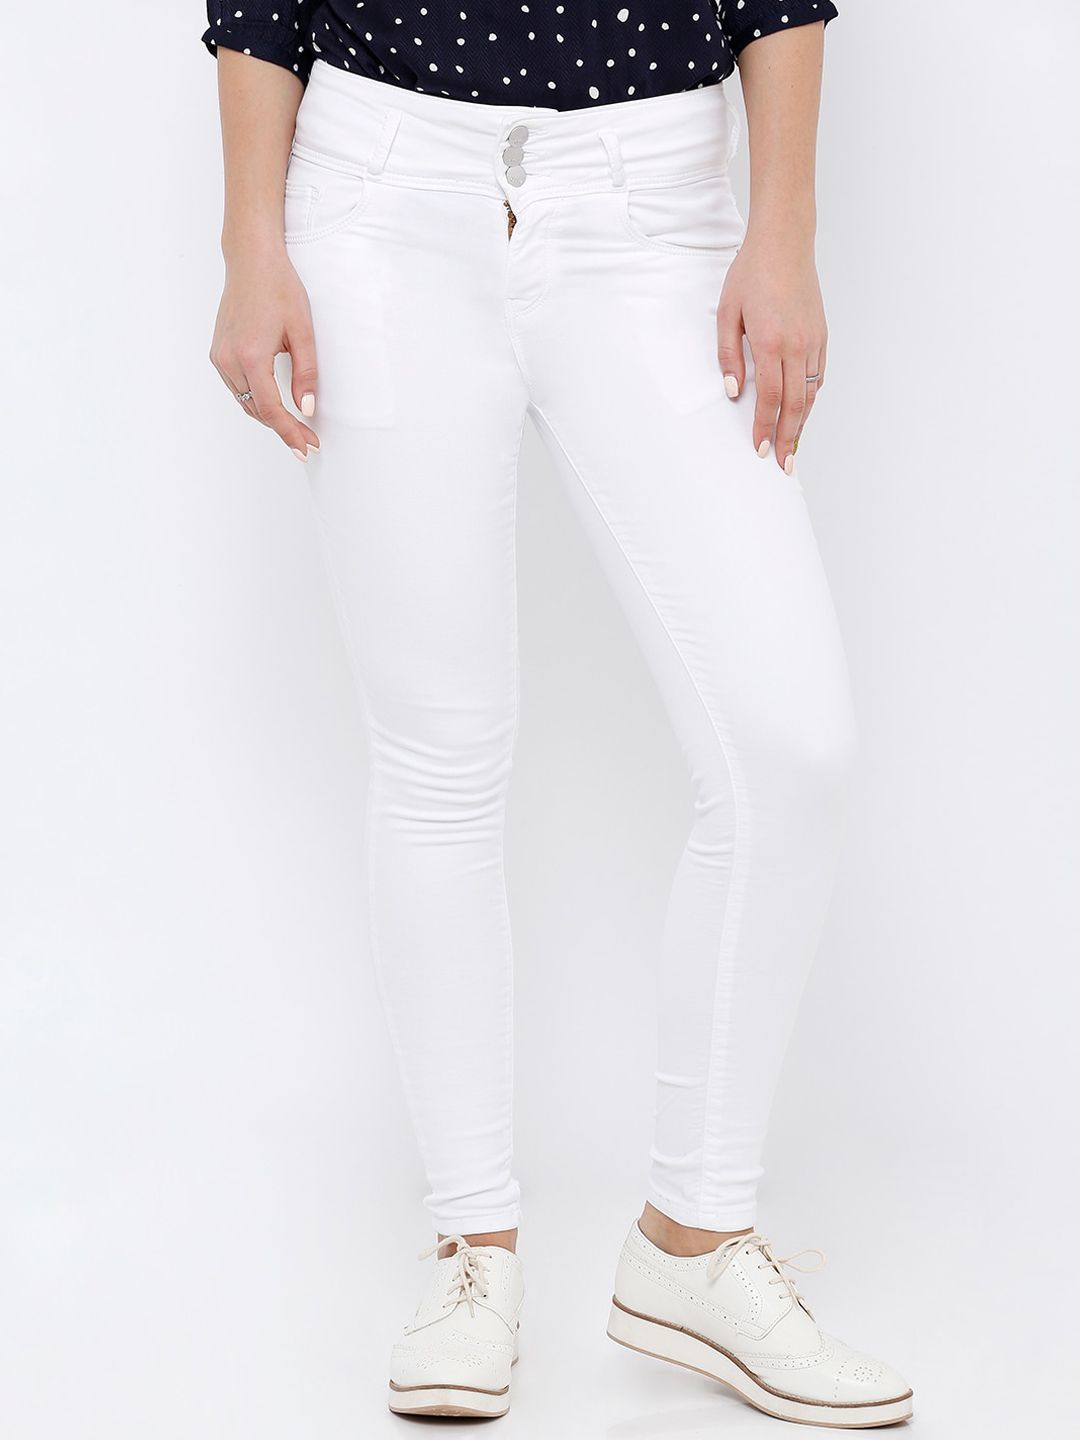 Kraus Jeans Women White Skinny Fit High-Rise Stretchable Jeans Price in India